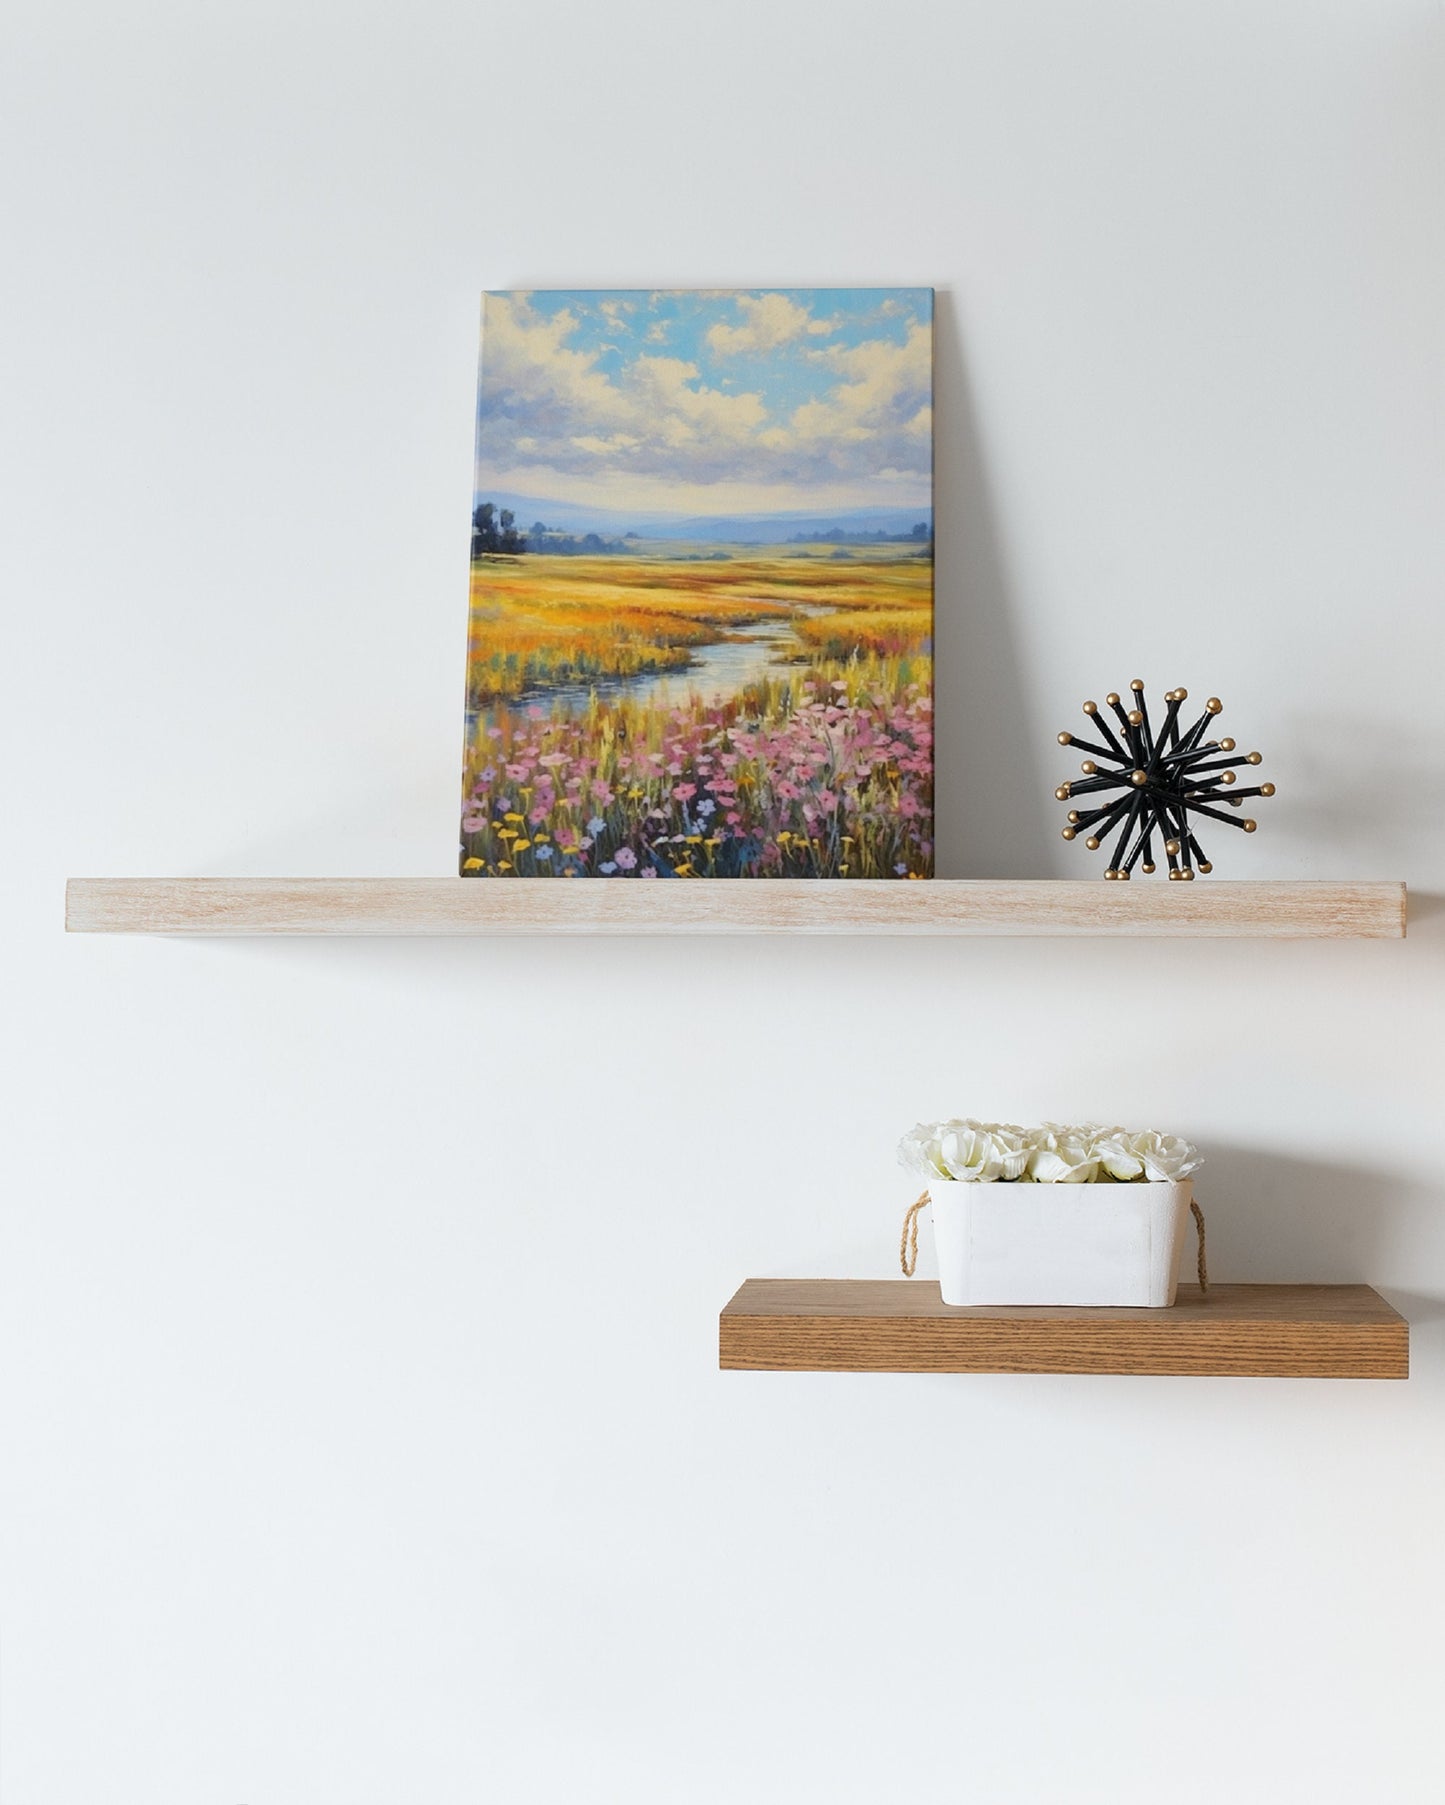 Modern and Simple Wildflower Canvas Art in a Frame - Perfect for Flower and Farmhouse Wall Decor